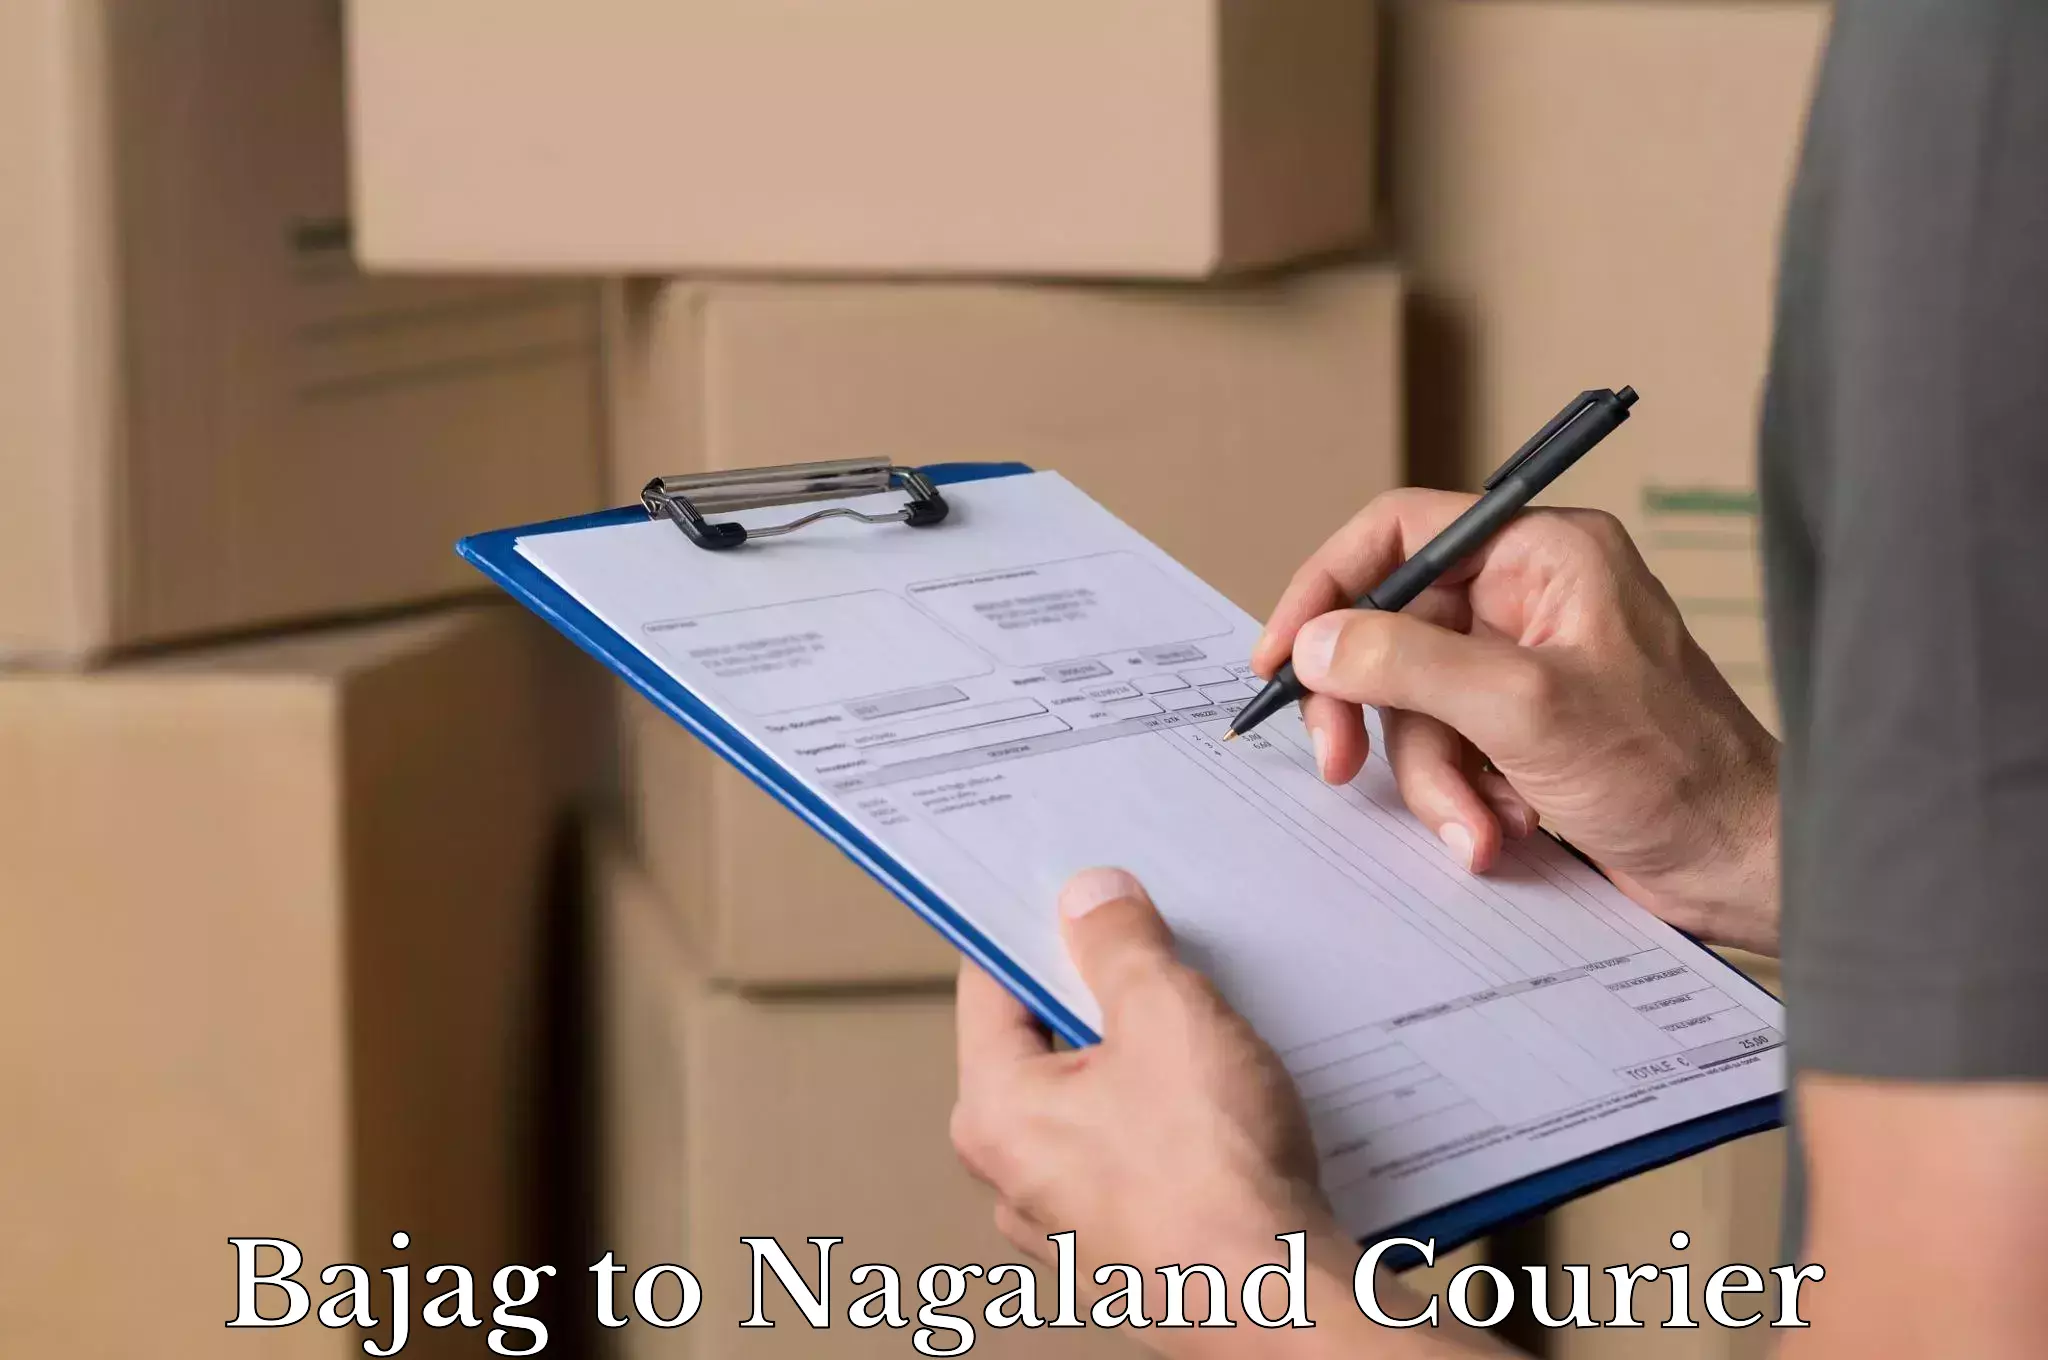 Instant baggage transport quote Bajag to Nagaland